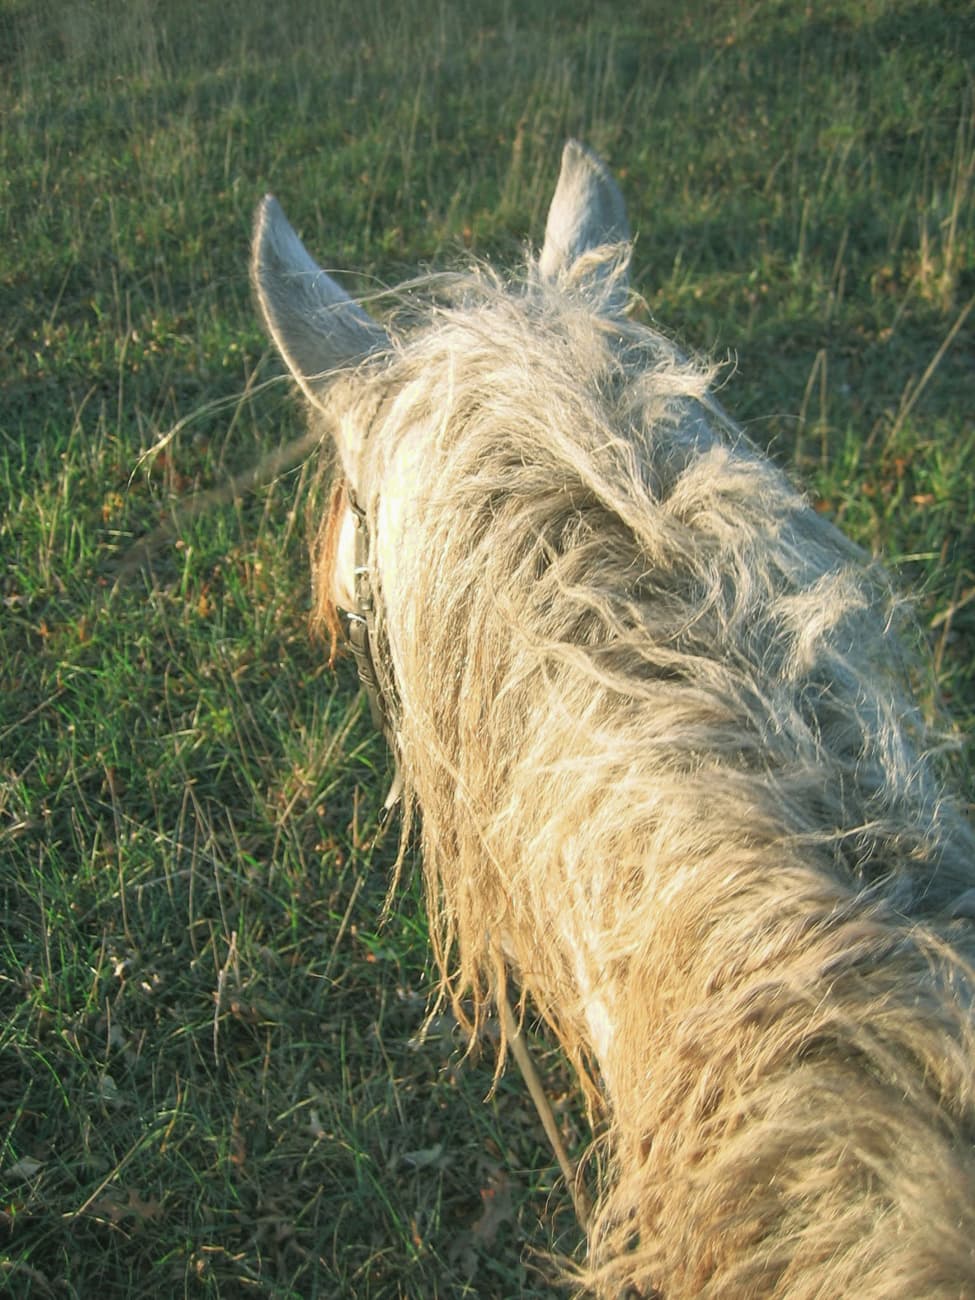 Photograph of a grey horse's mane, shown from a rider's perspective above the horse.